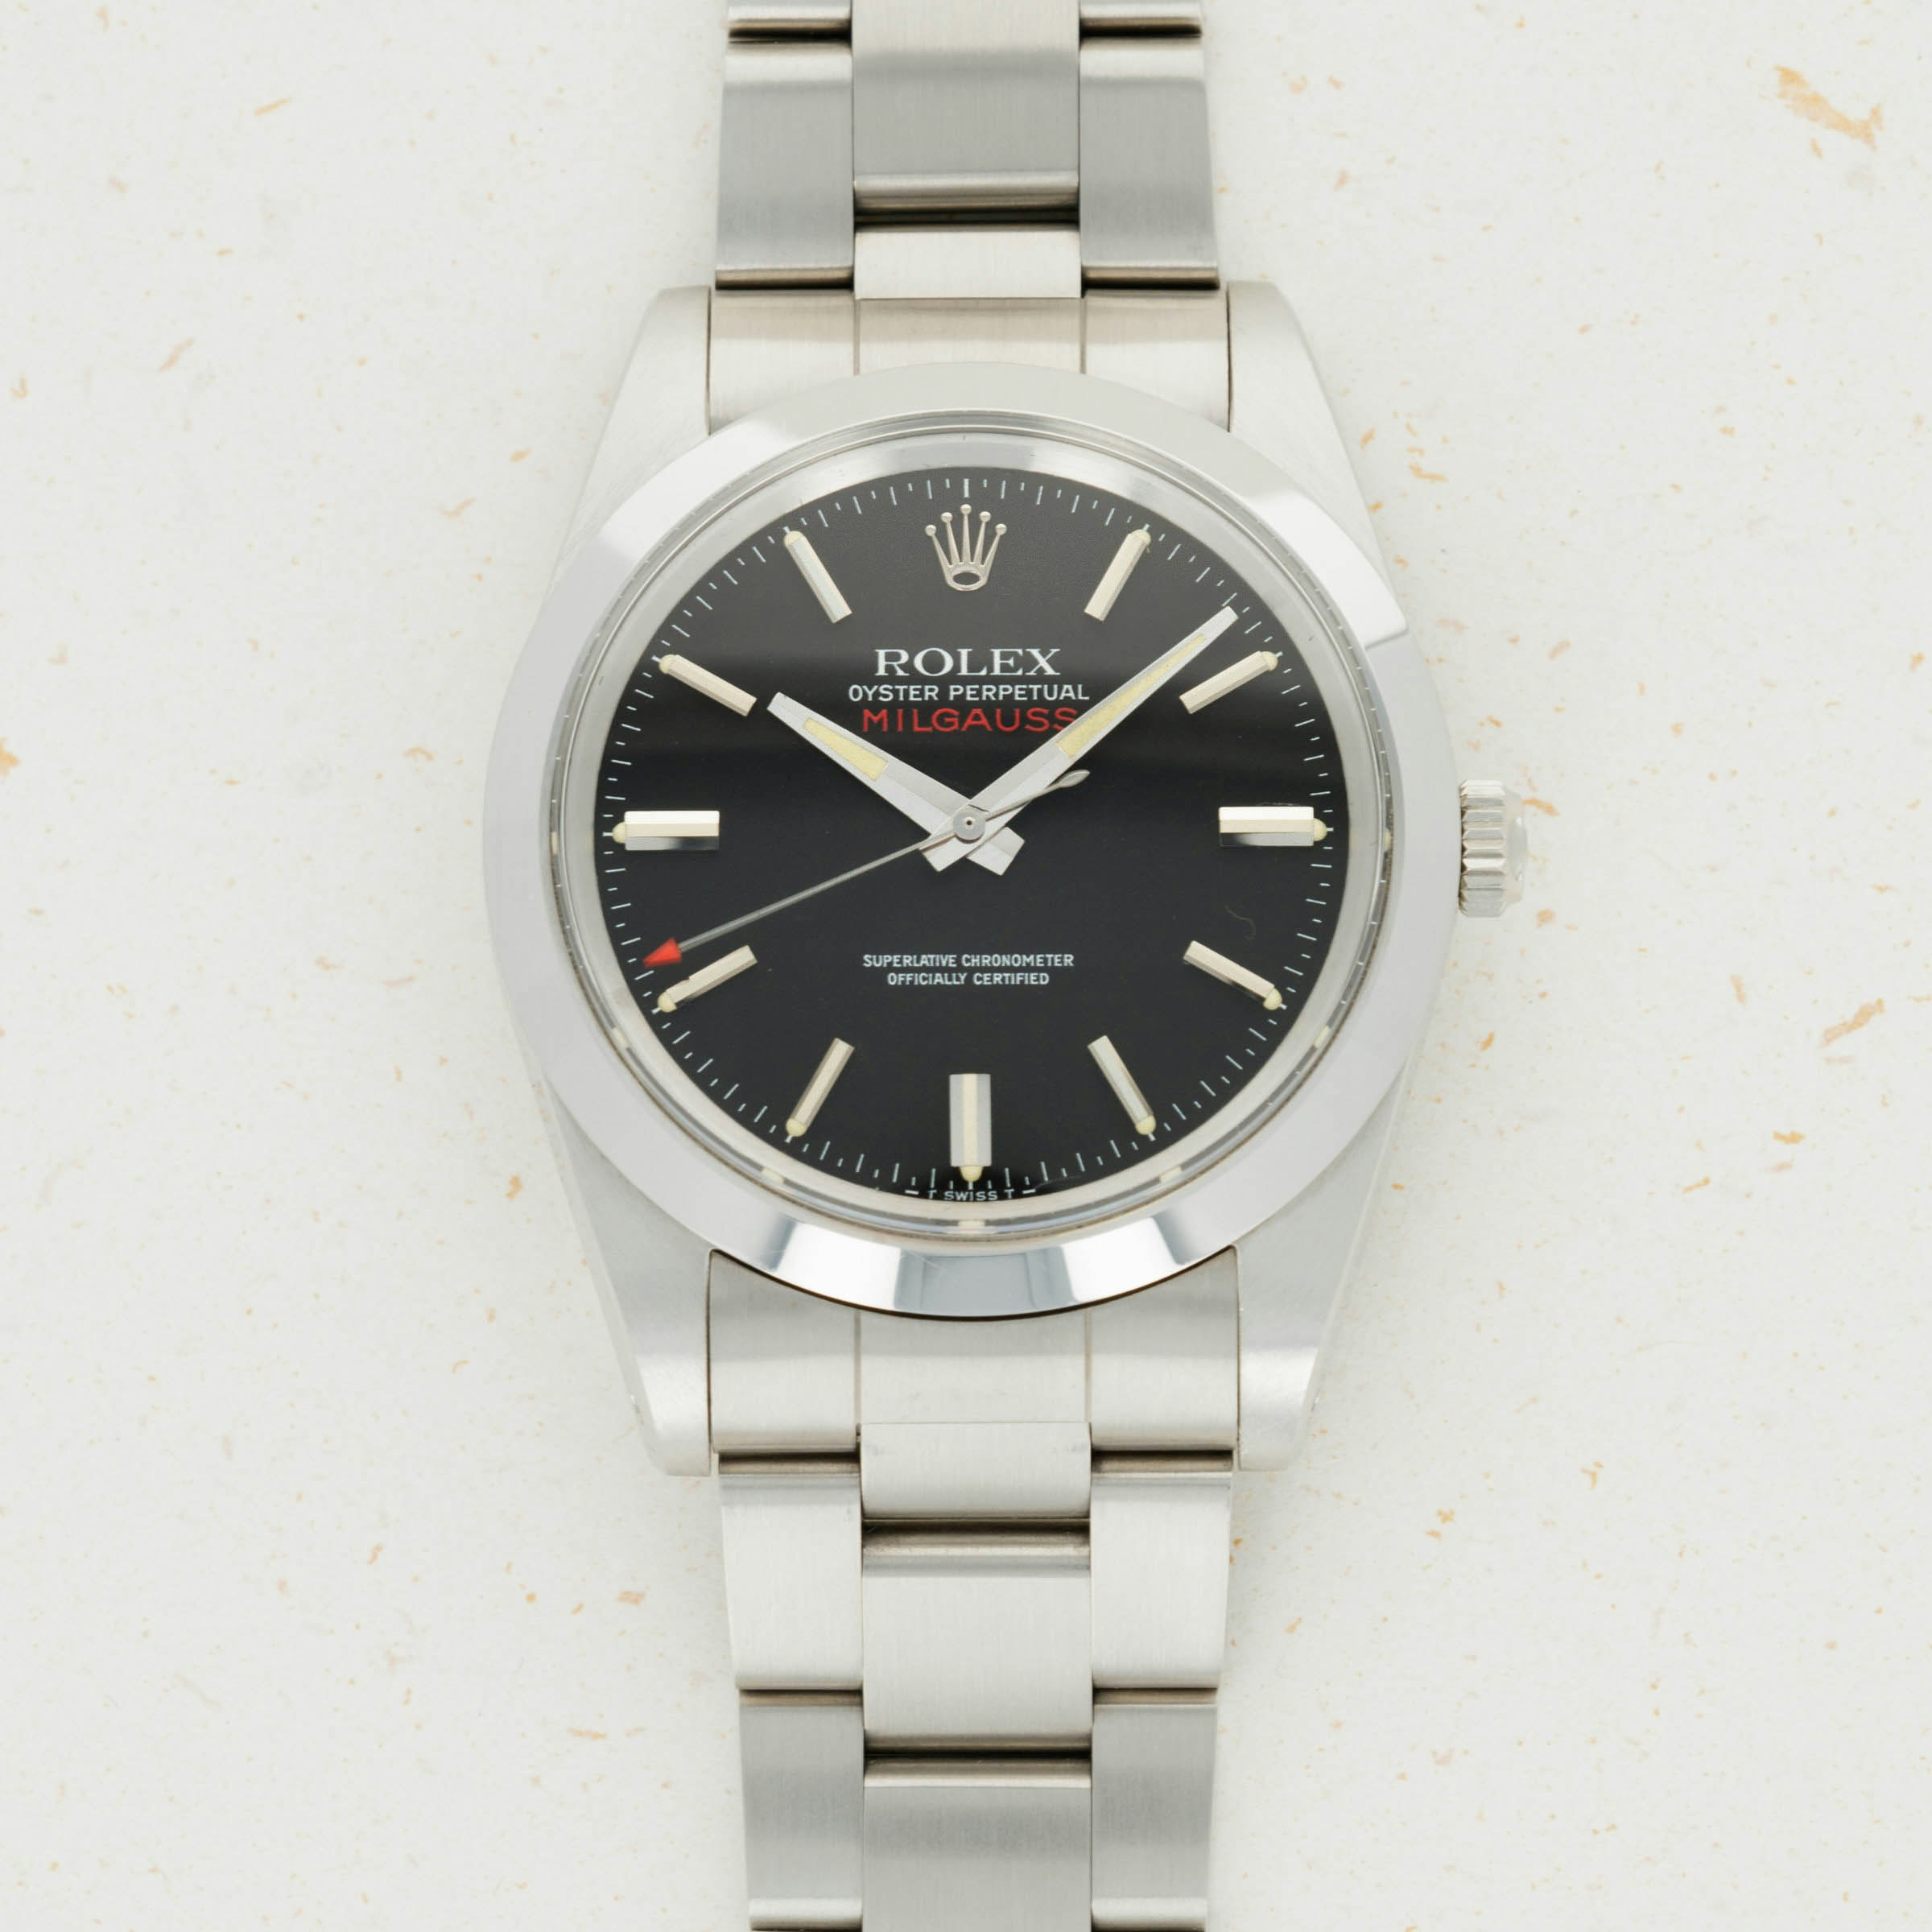 Thumbnail for Rolex Milgauss 1019 Black dial NOS Box and Papers